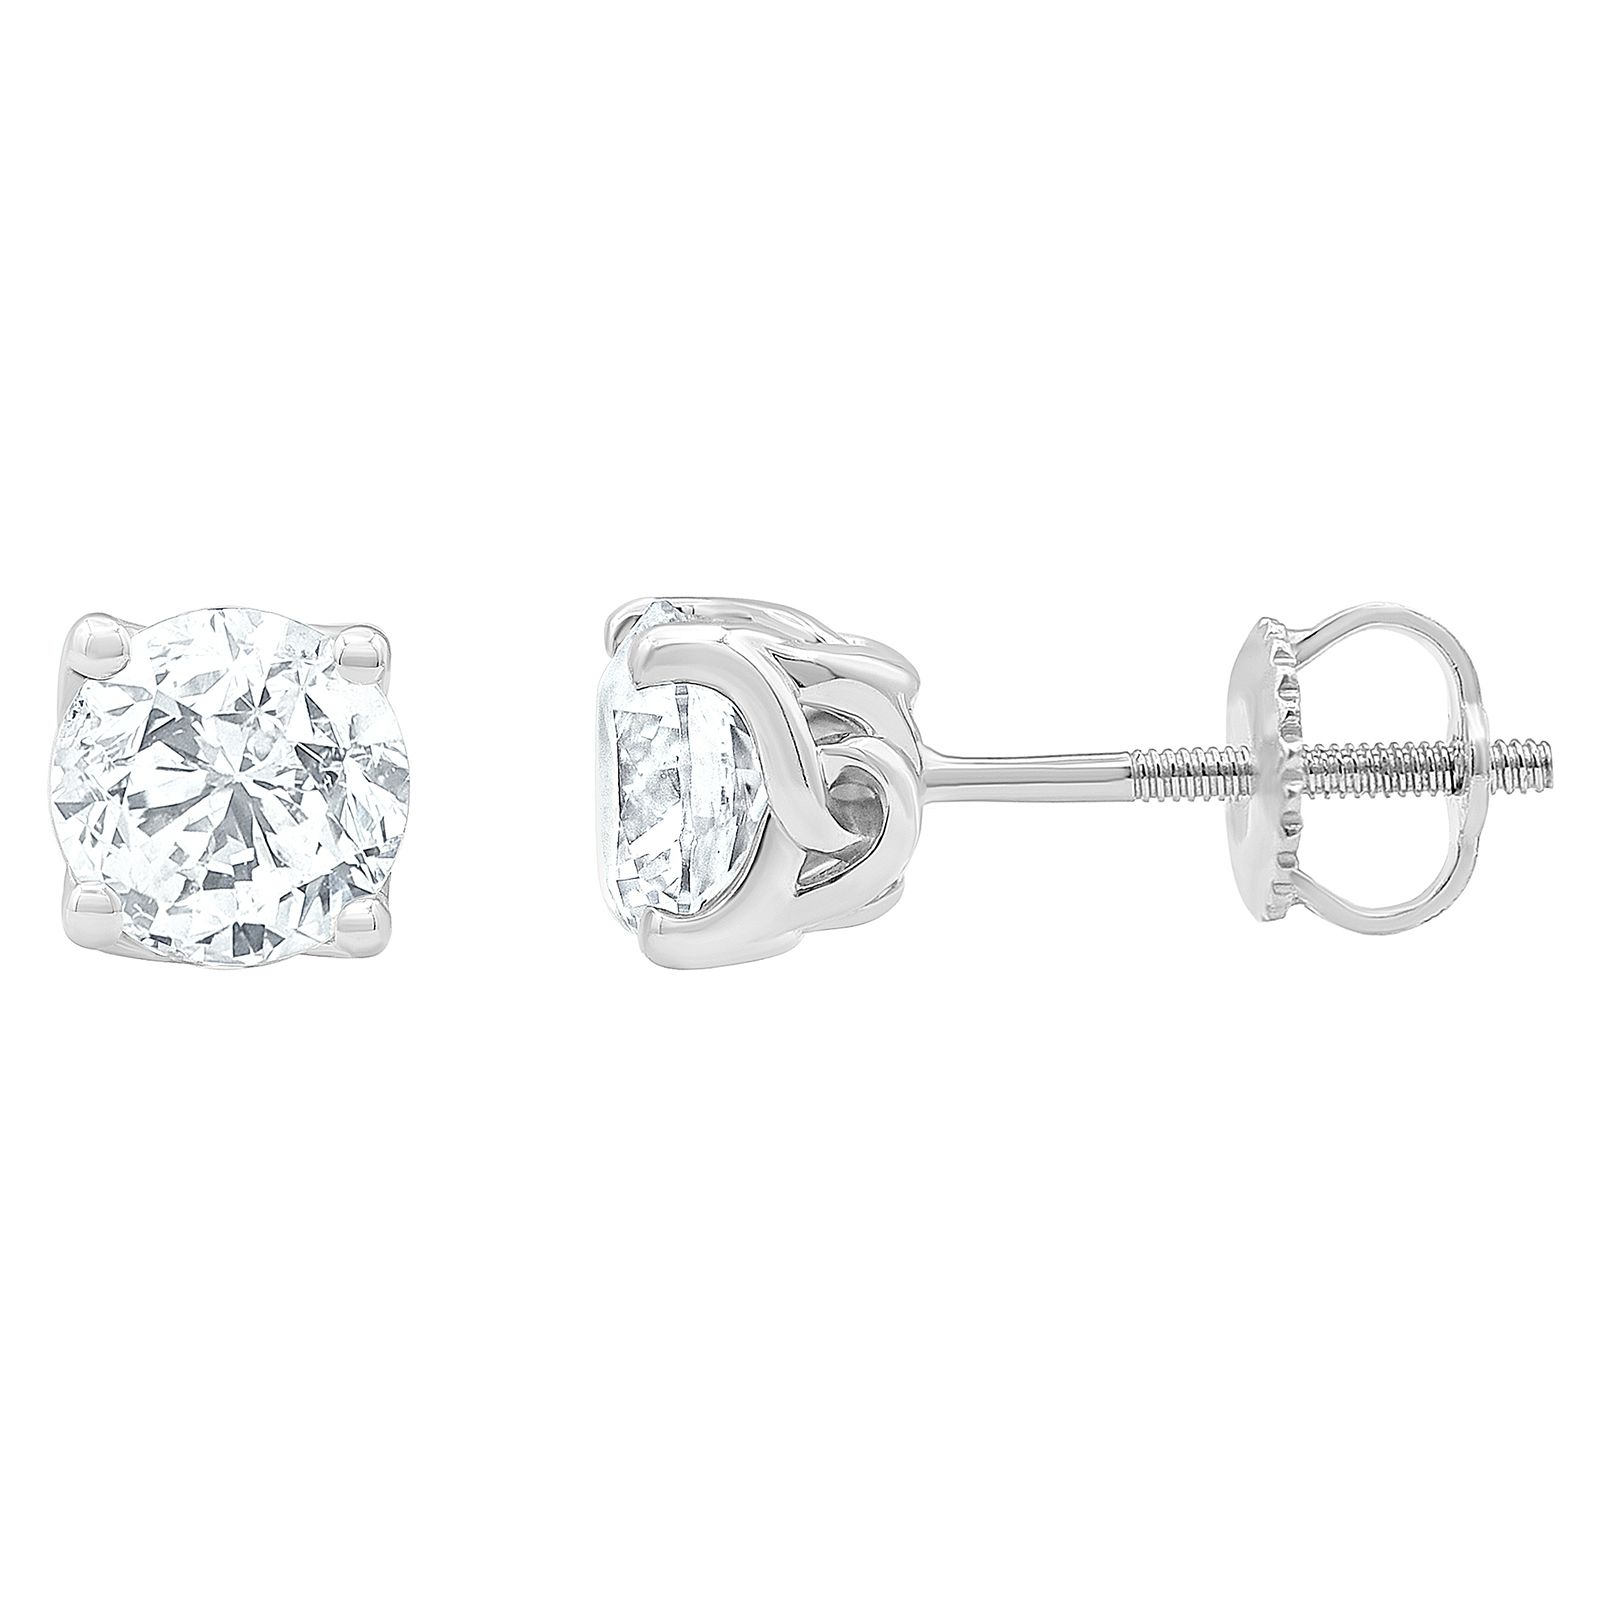 Pocket-Friendly Wholesale baby diamond stud earrings For All Occasions 